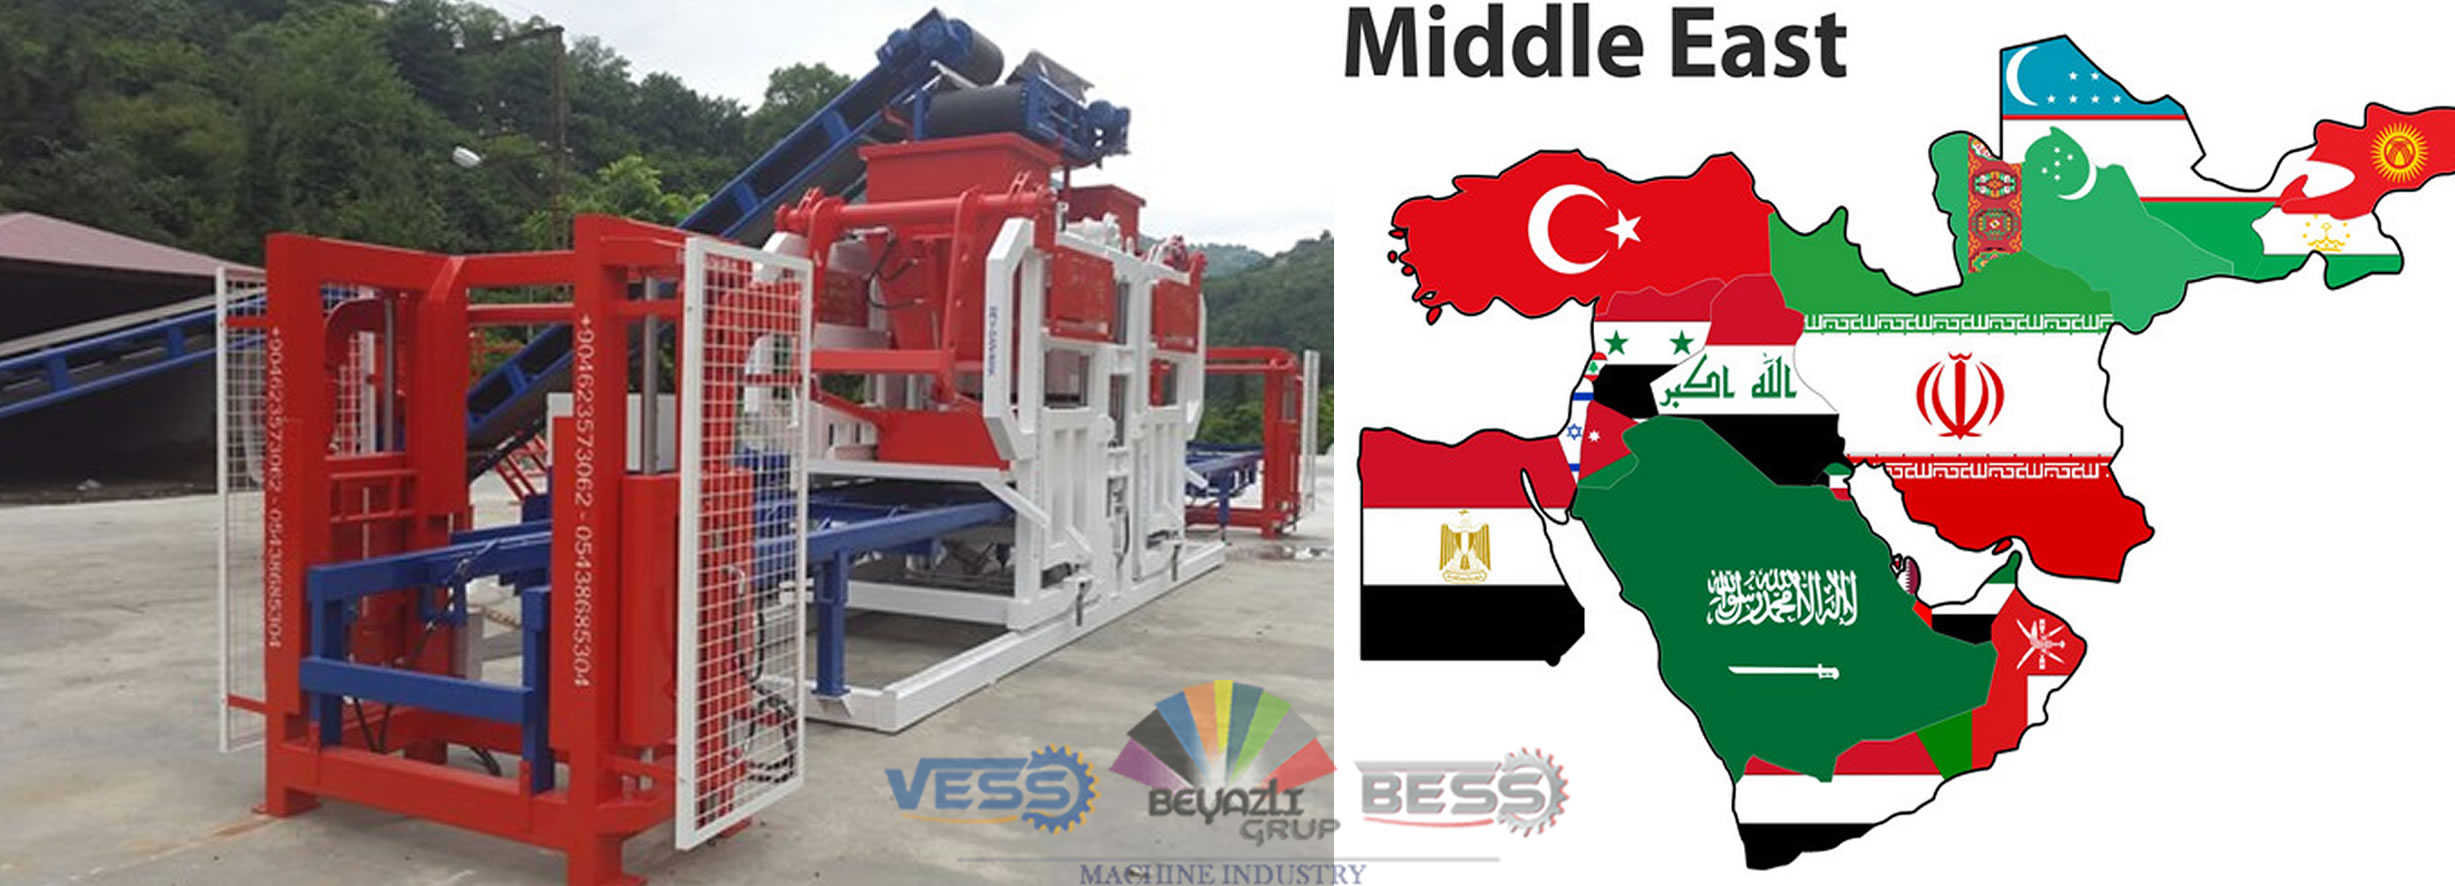 Concrete Block Making Machine For Middle East Countries Block Making Machine Bess Machines